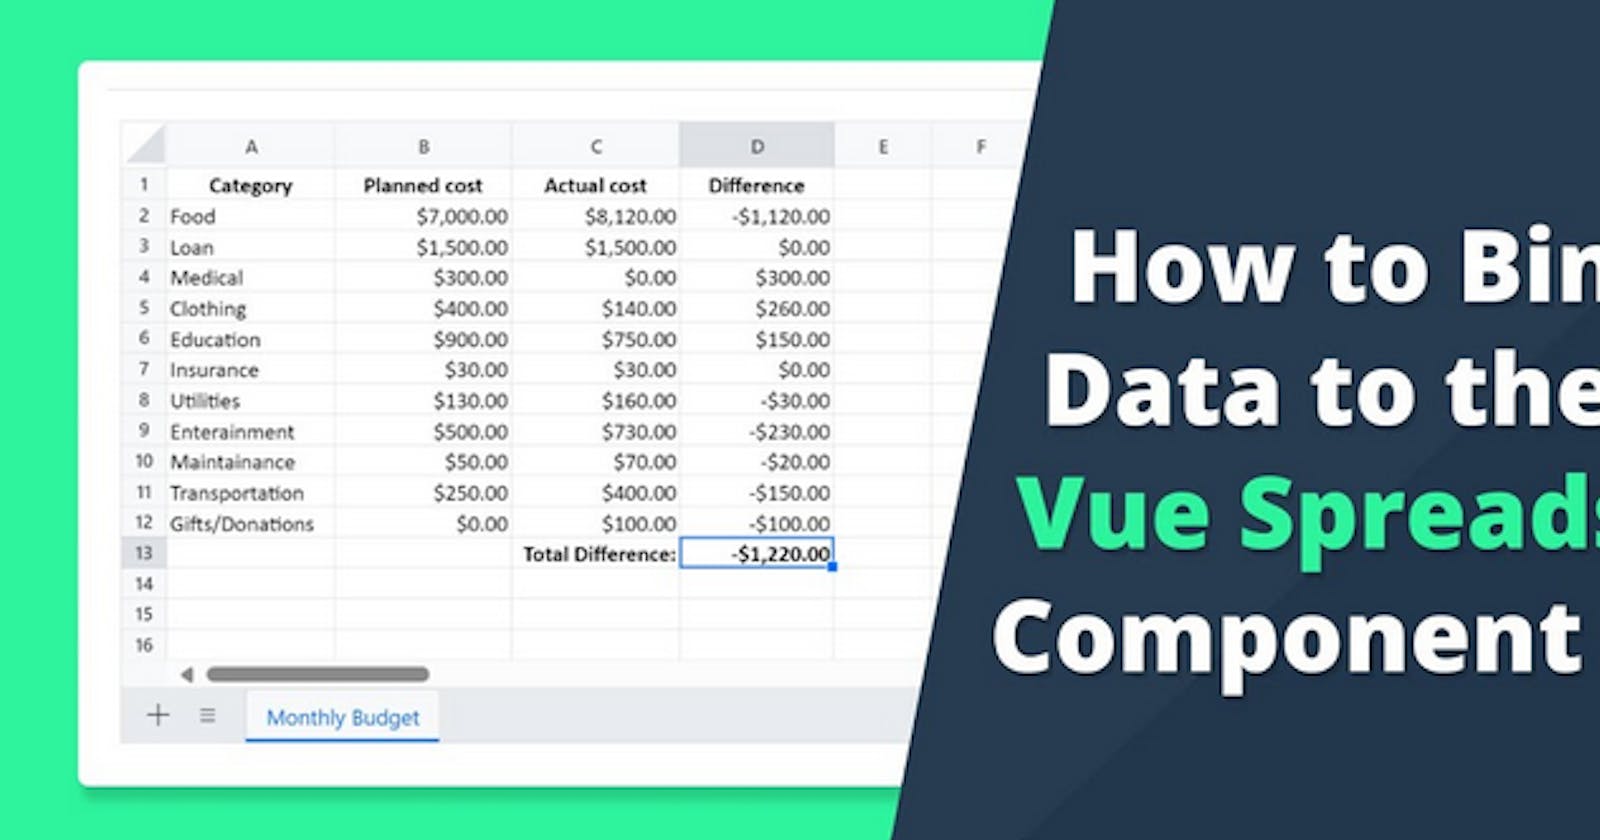 How to Bind Data to the Vue Spreadsheet Component